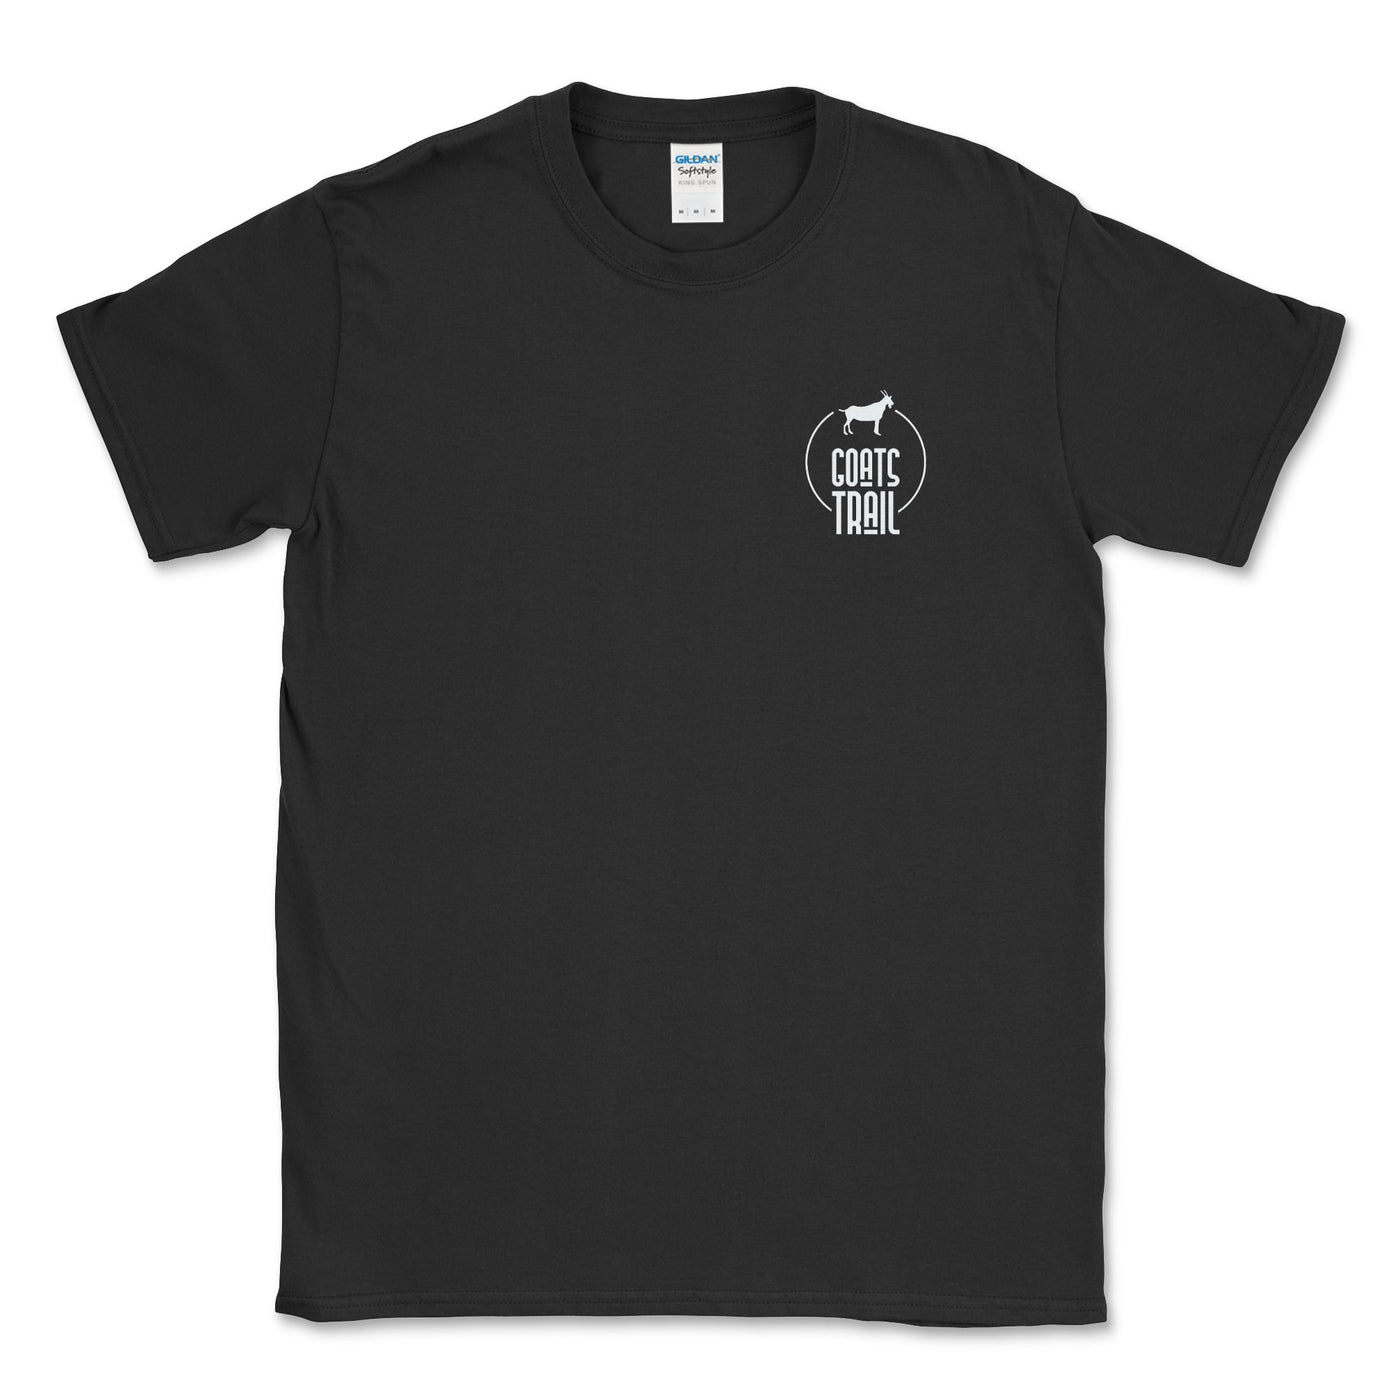 4 Low Lifestyle Tee Shirt - Goats Trail Off-Road Apparel Company